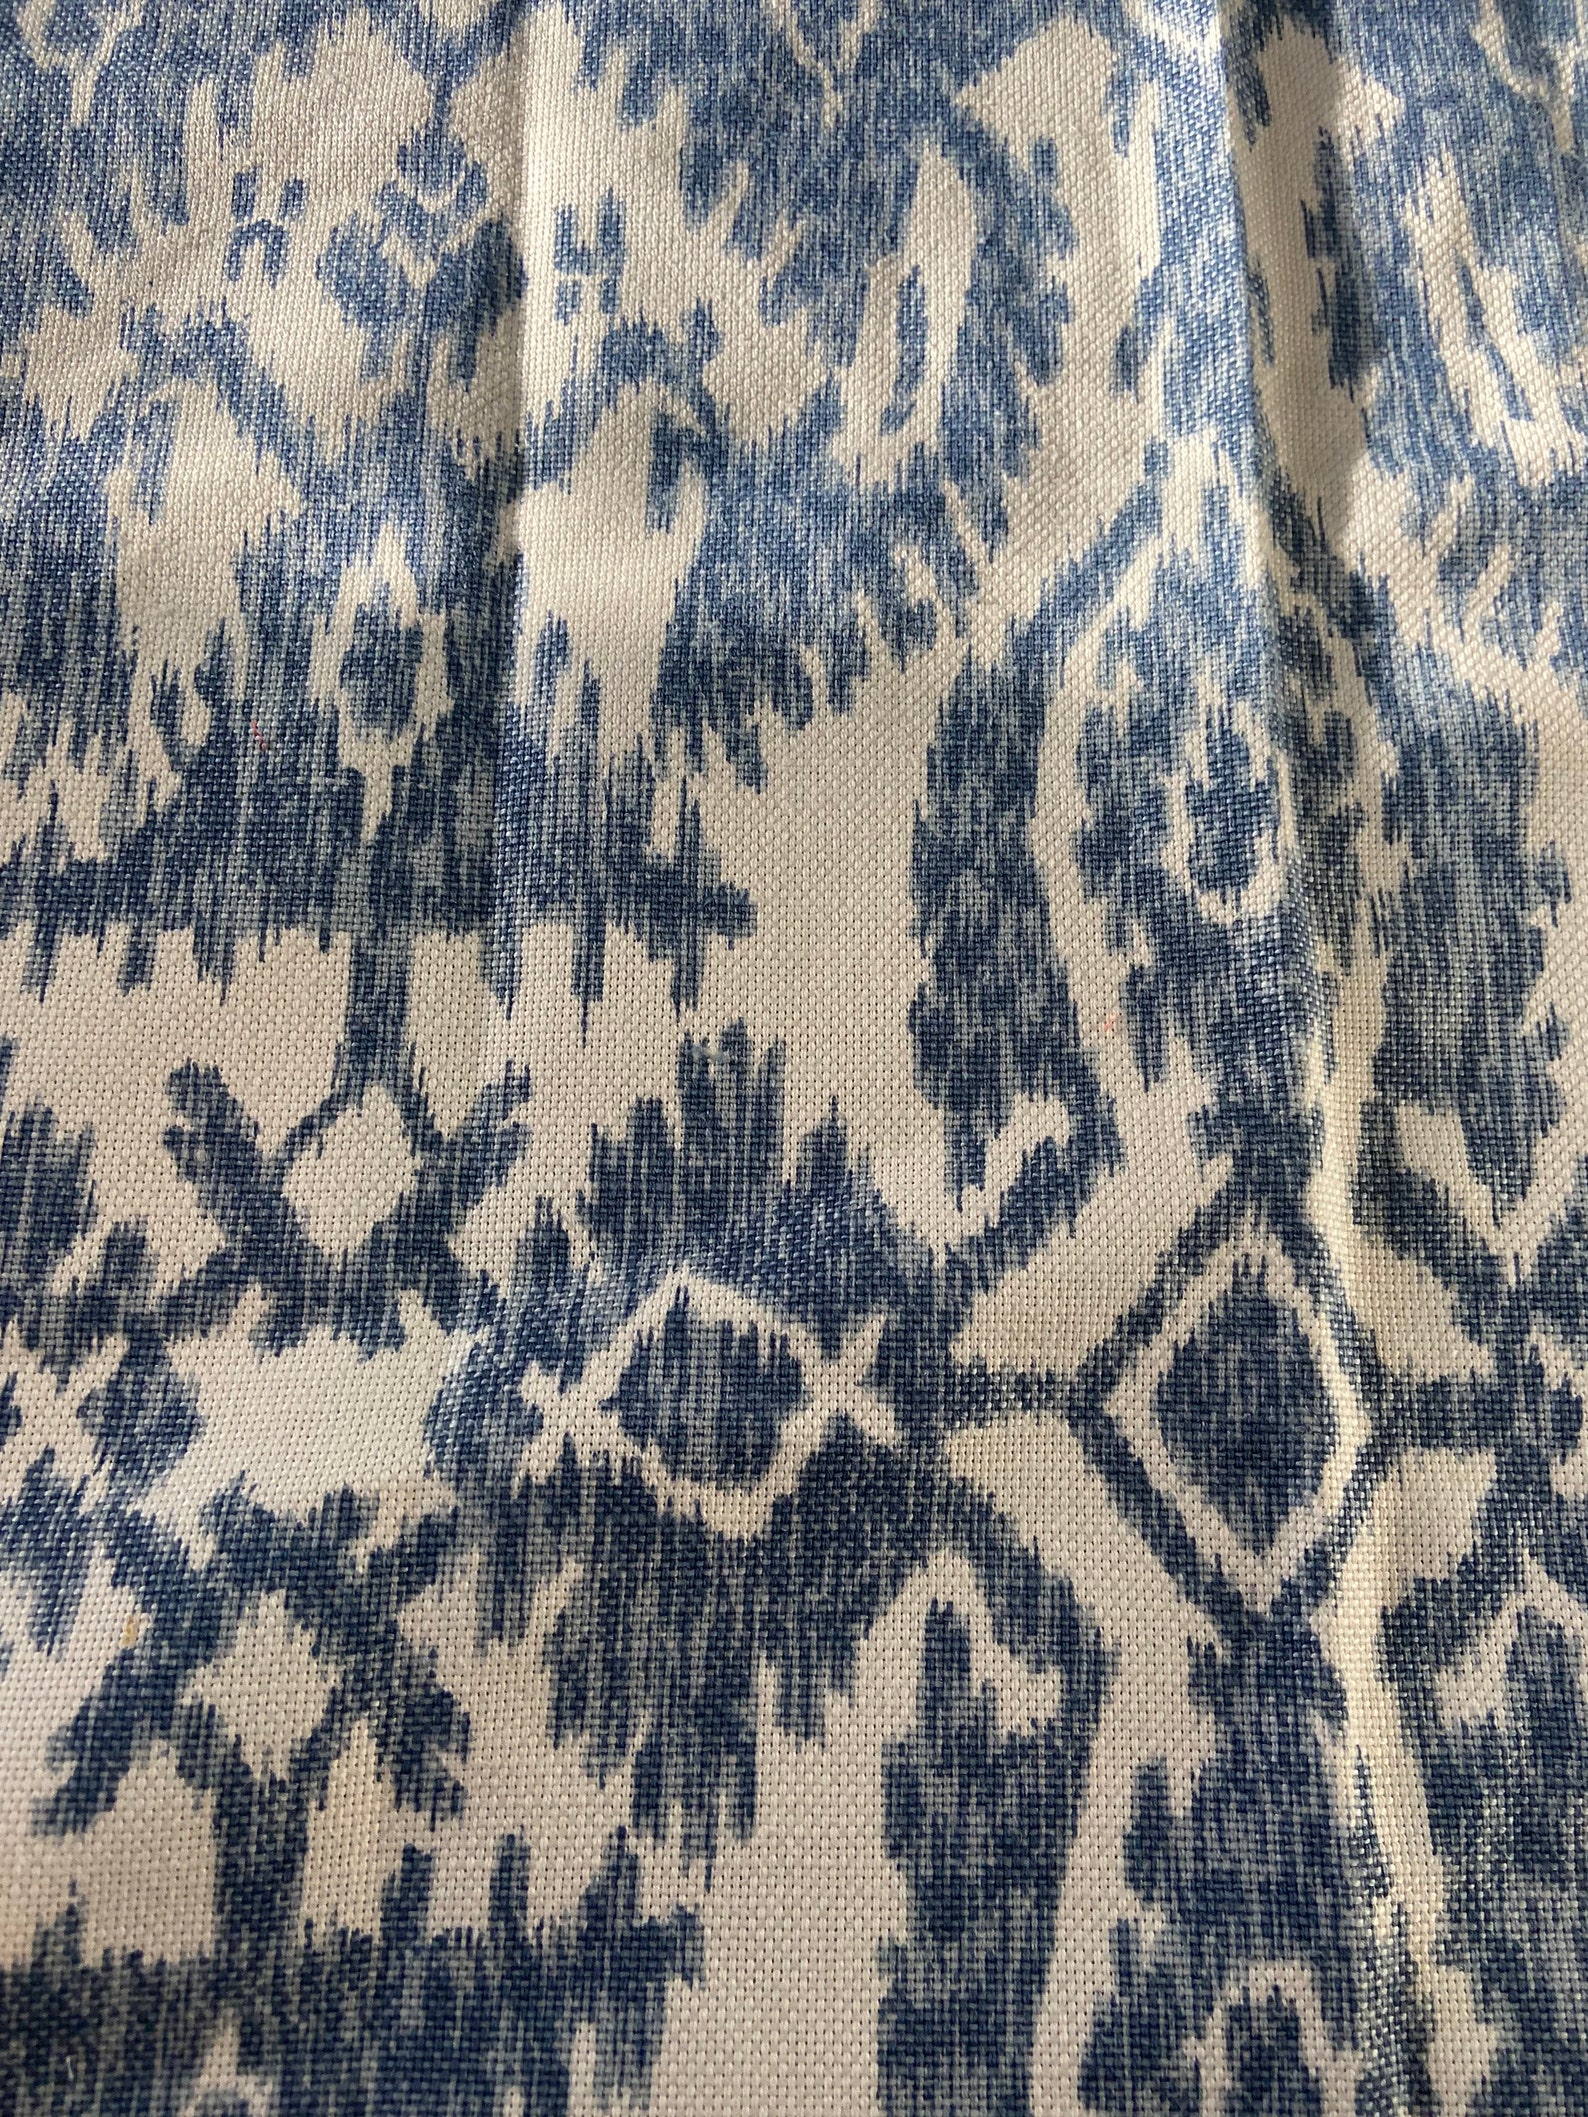 Thibaut Blue & White Ikat Fabric Sample Remnant High-end - Etsy